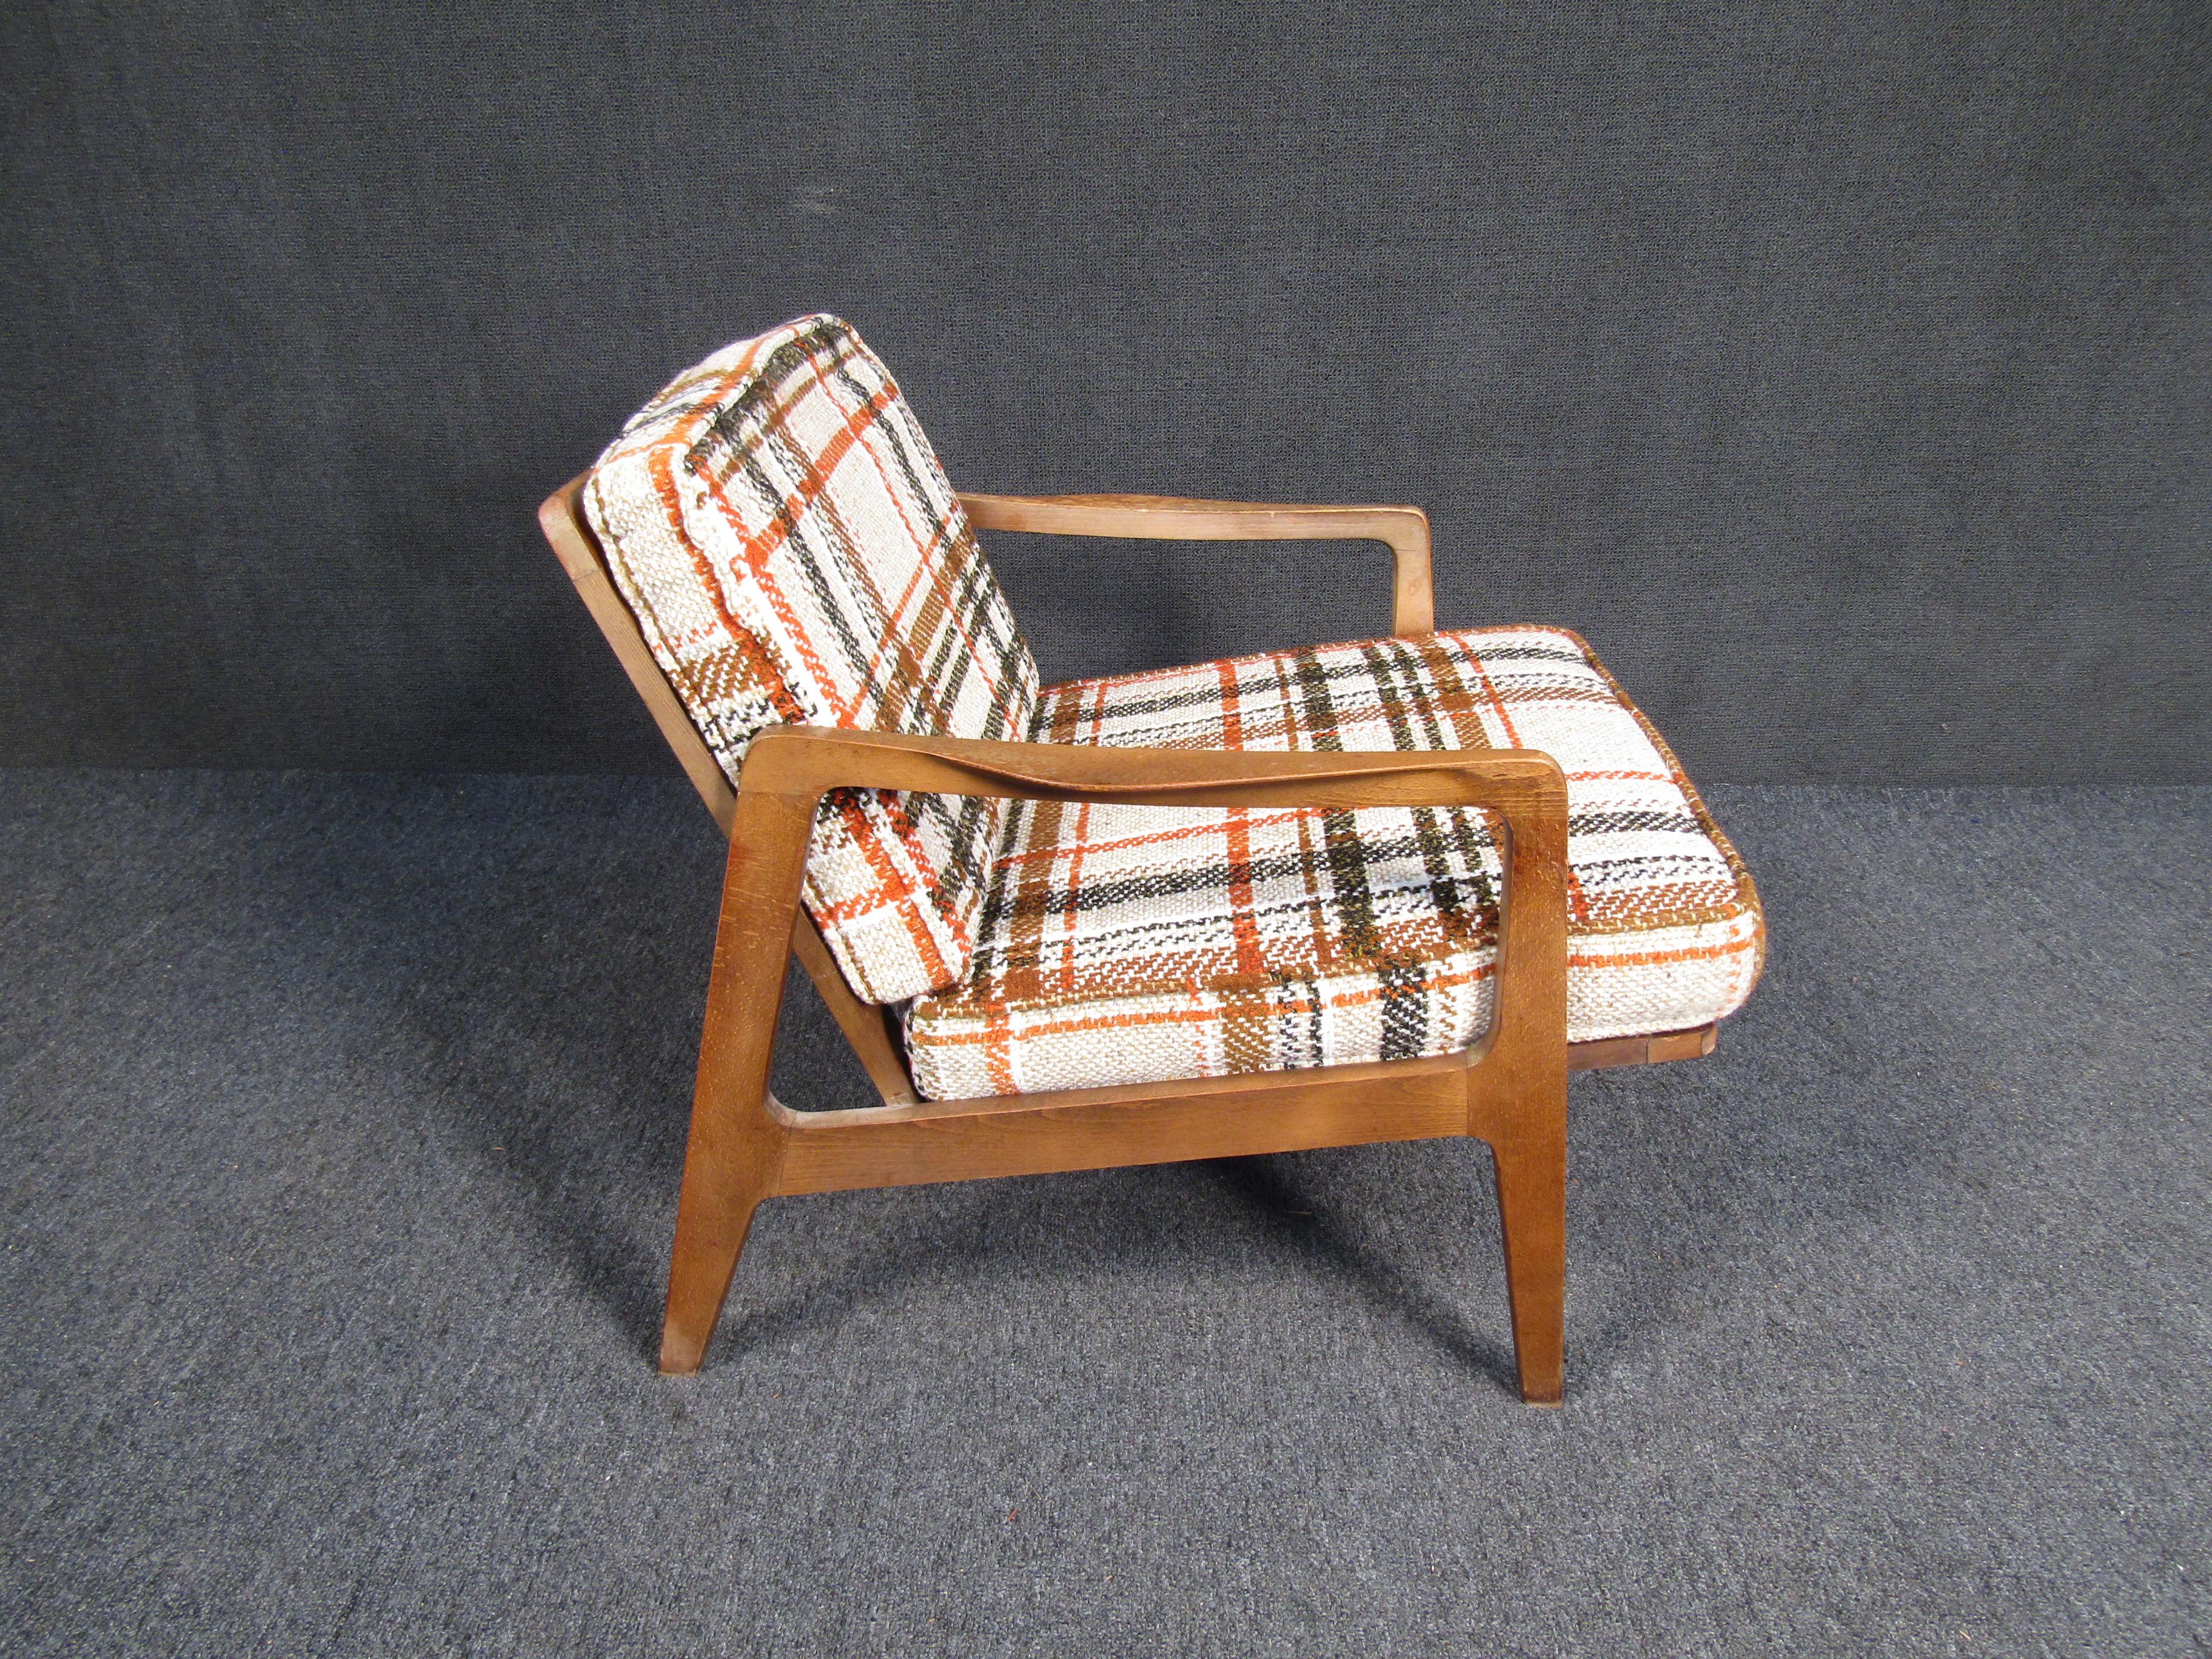 A stylish and colorfully-upholstered walnut lounge chair with comfortable large cushions. Please confirm item location with seller (NY/NJ).